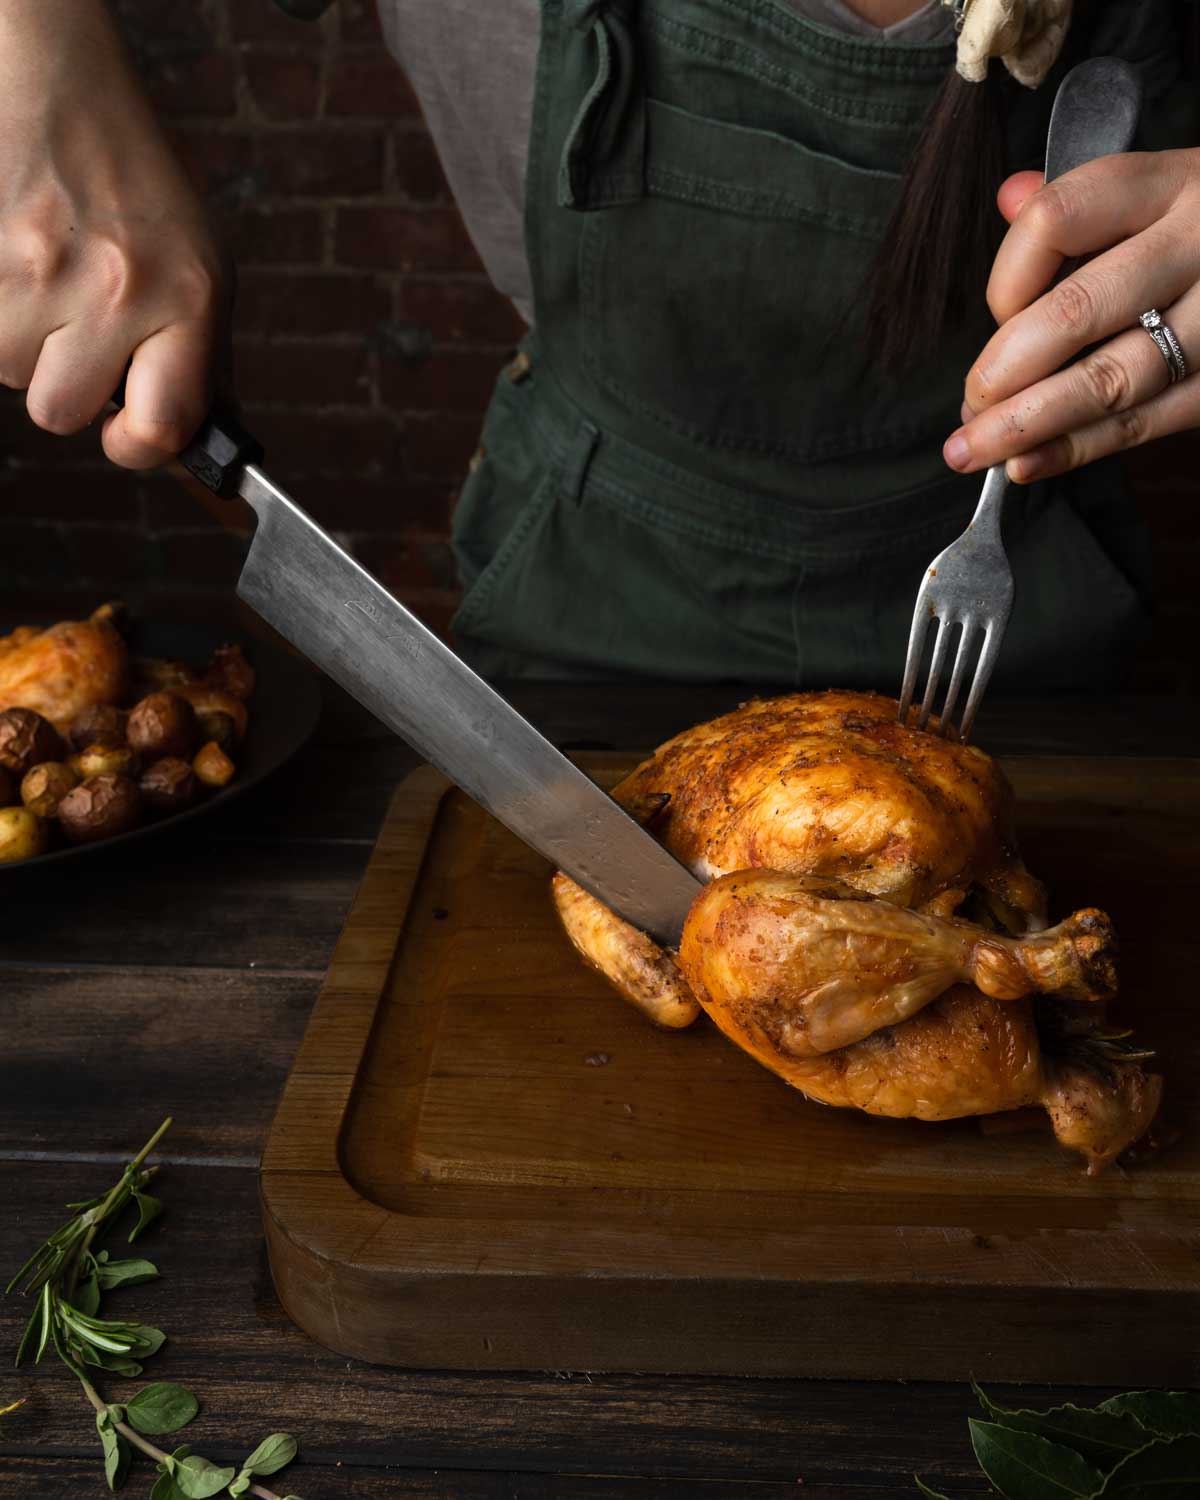 A sharp knife slicing the hind quarters off of the chicken.